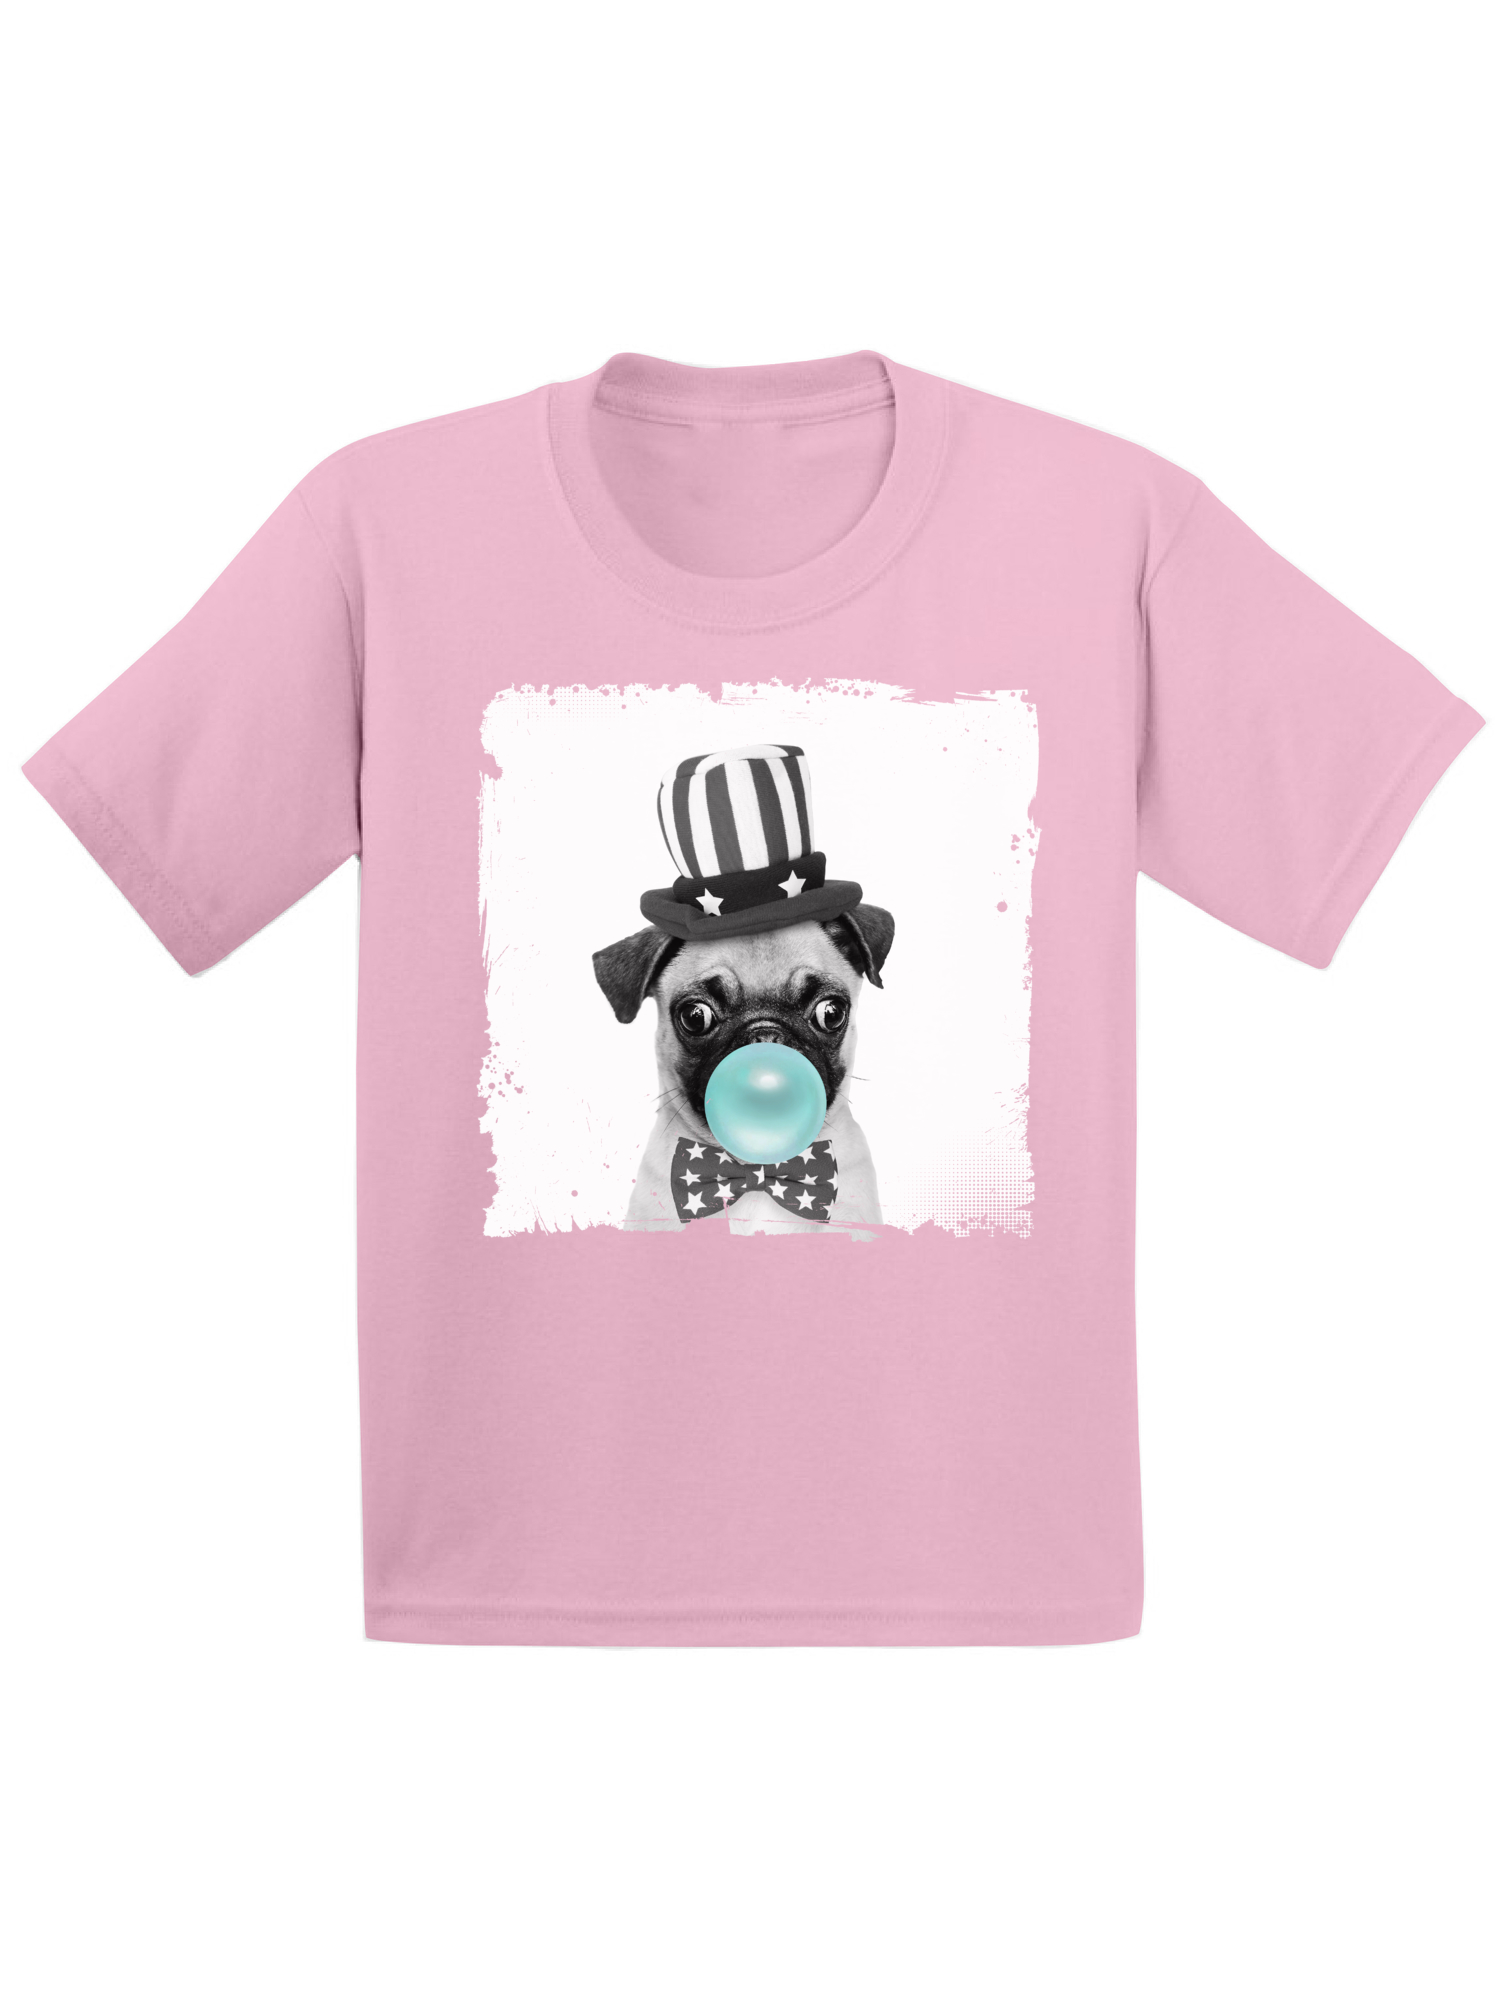 Awkward Styles Cute Pug Lovers Shirts Funny Gifts for Kids Childrens Outfit Puppy Pug Tshirt Pug Toddler Shirt Toddler T Shirt for Kids New Animal Collection Funny Pug with Gum Pug Clothing - image 1 of 4